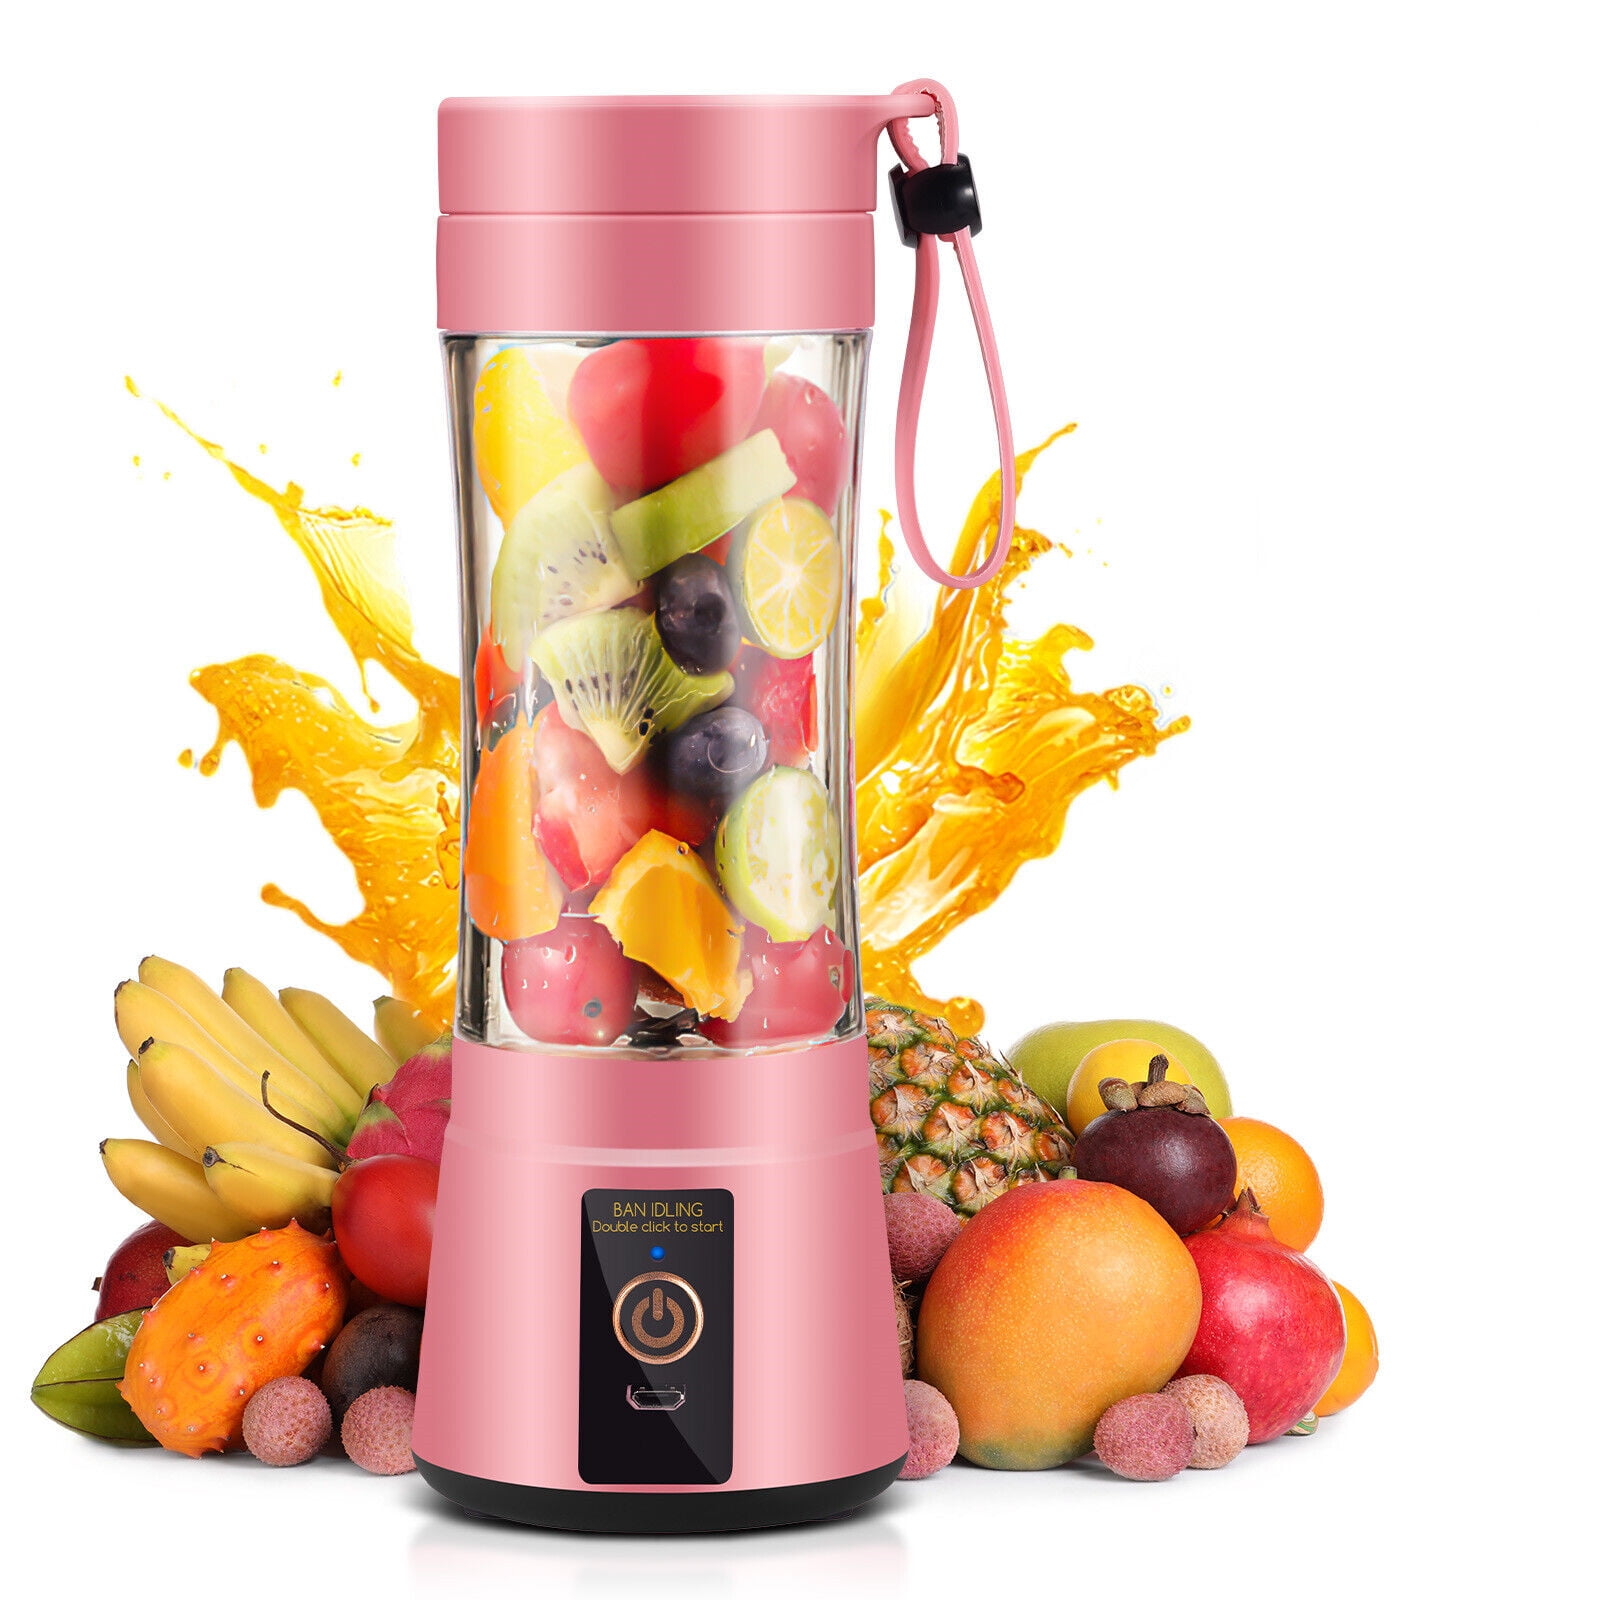 Pink Milk Shakes 380ml Personal Mixer Fruit Rechargeable with USB UPGRADED VERSION OUNJE Portable Blender Six 3D Blades for Great Mixing Mini Blender for Smoothie Fruit Juice 